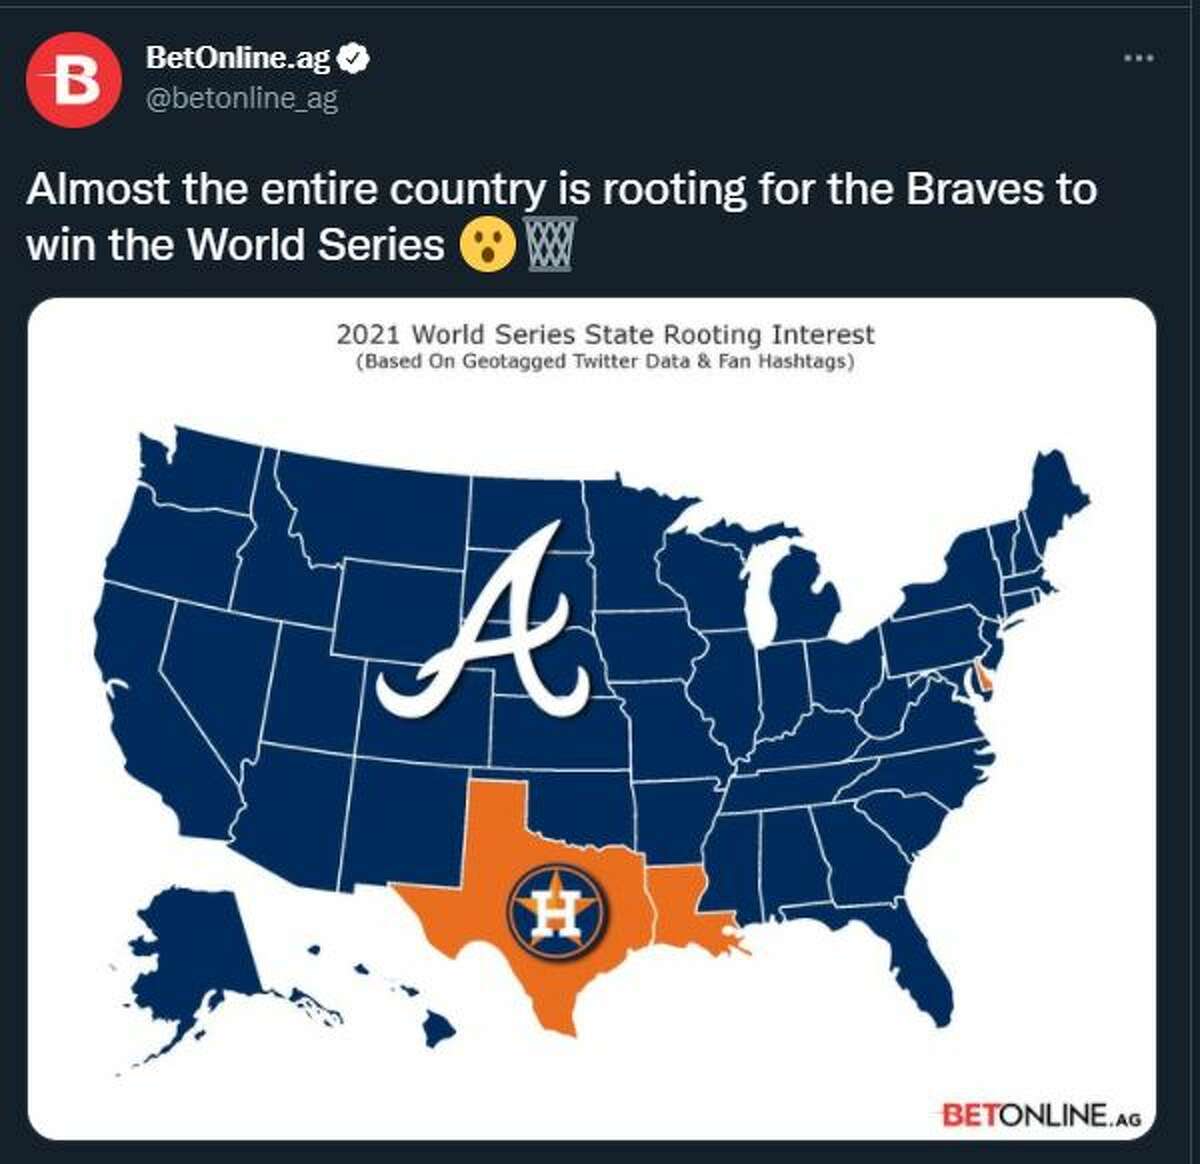 Only two other states join Texas in rooting for the Astros